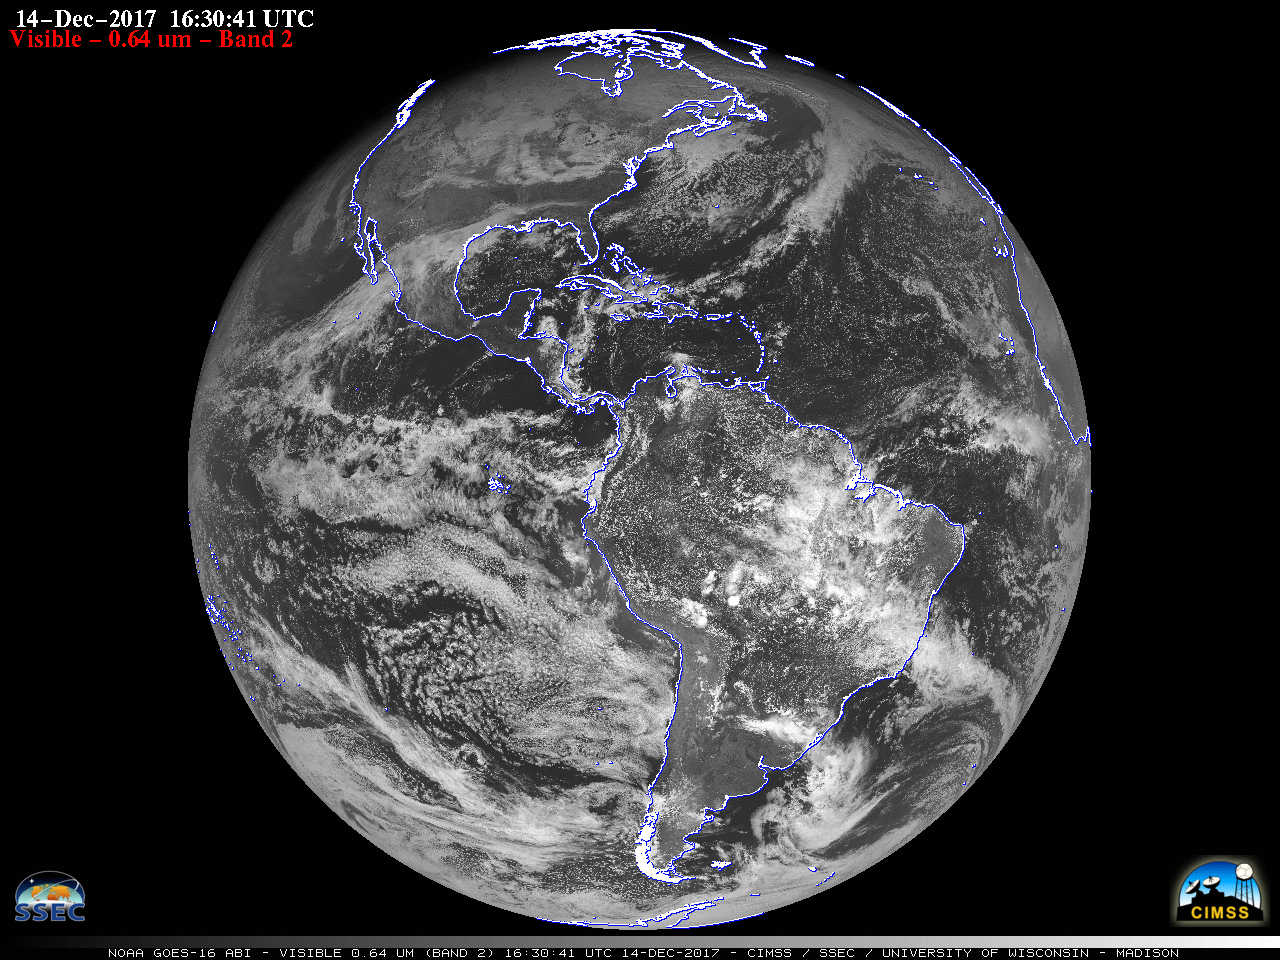 GOES-16 Full-Disk Visible (0.64 µm) image [click to enlarge]